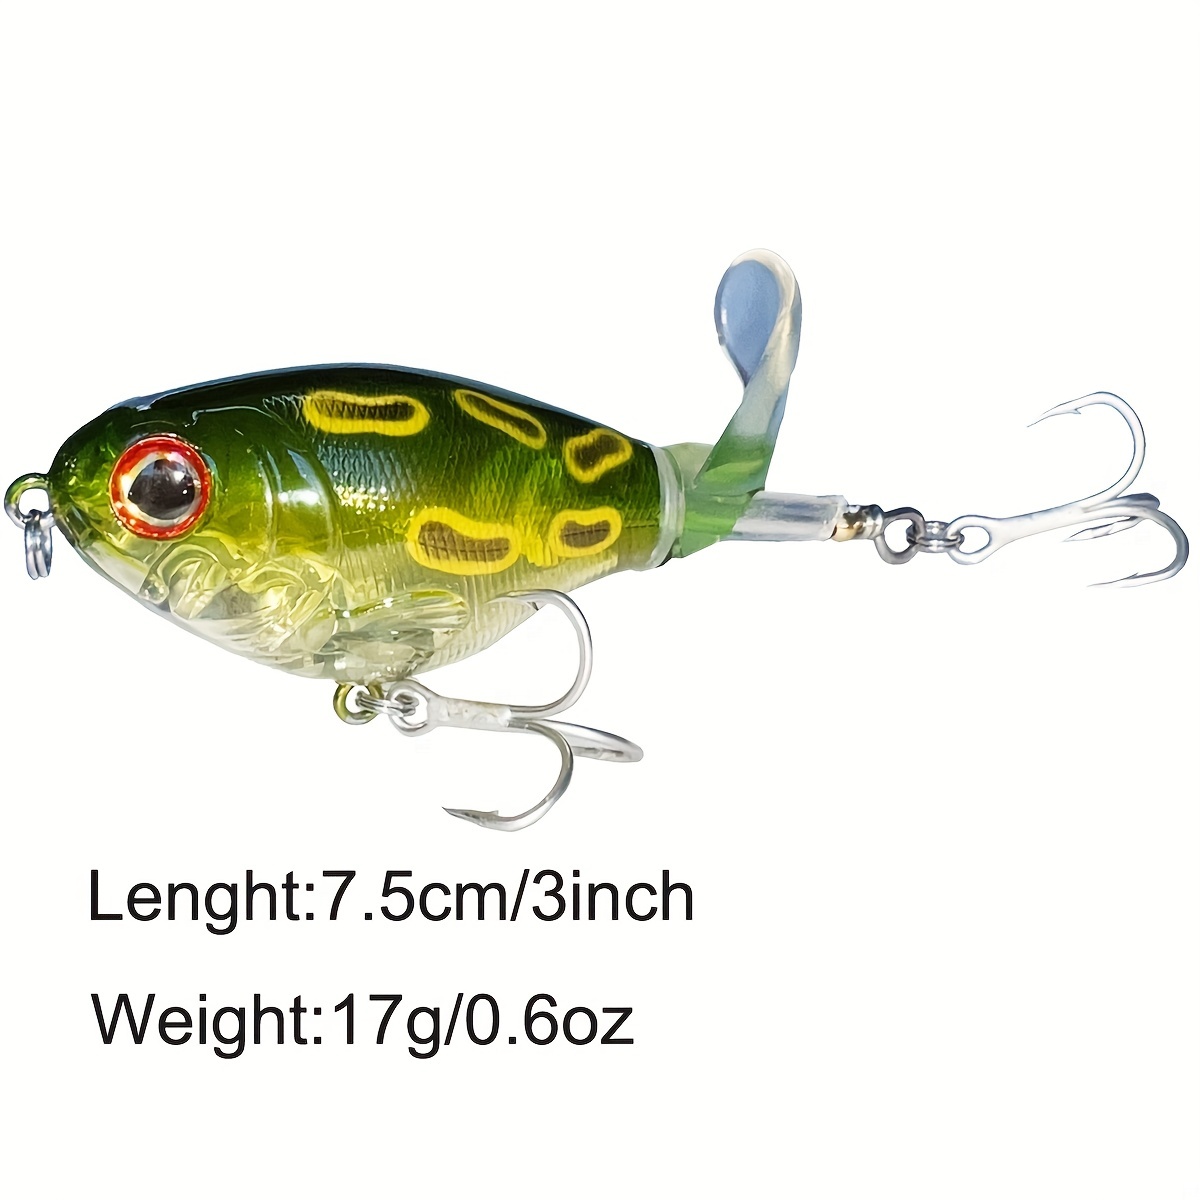 Buy TRUSCEND Top Water Fishing Lures with BKK Hooks, Whopper